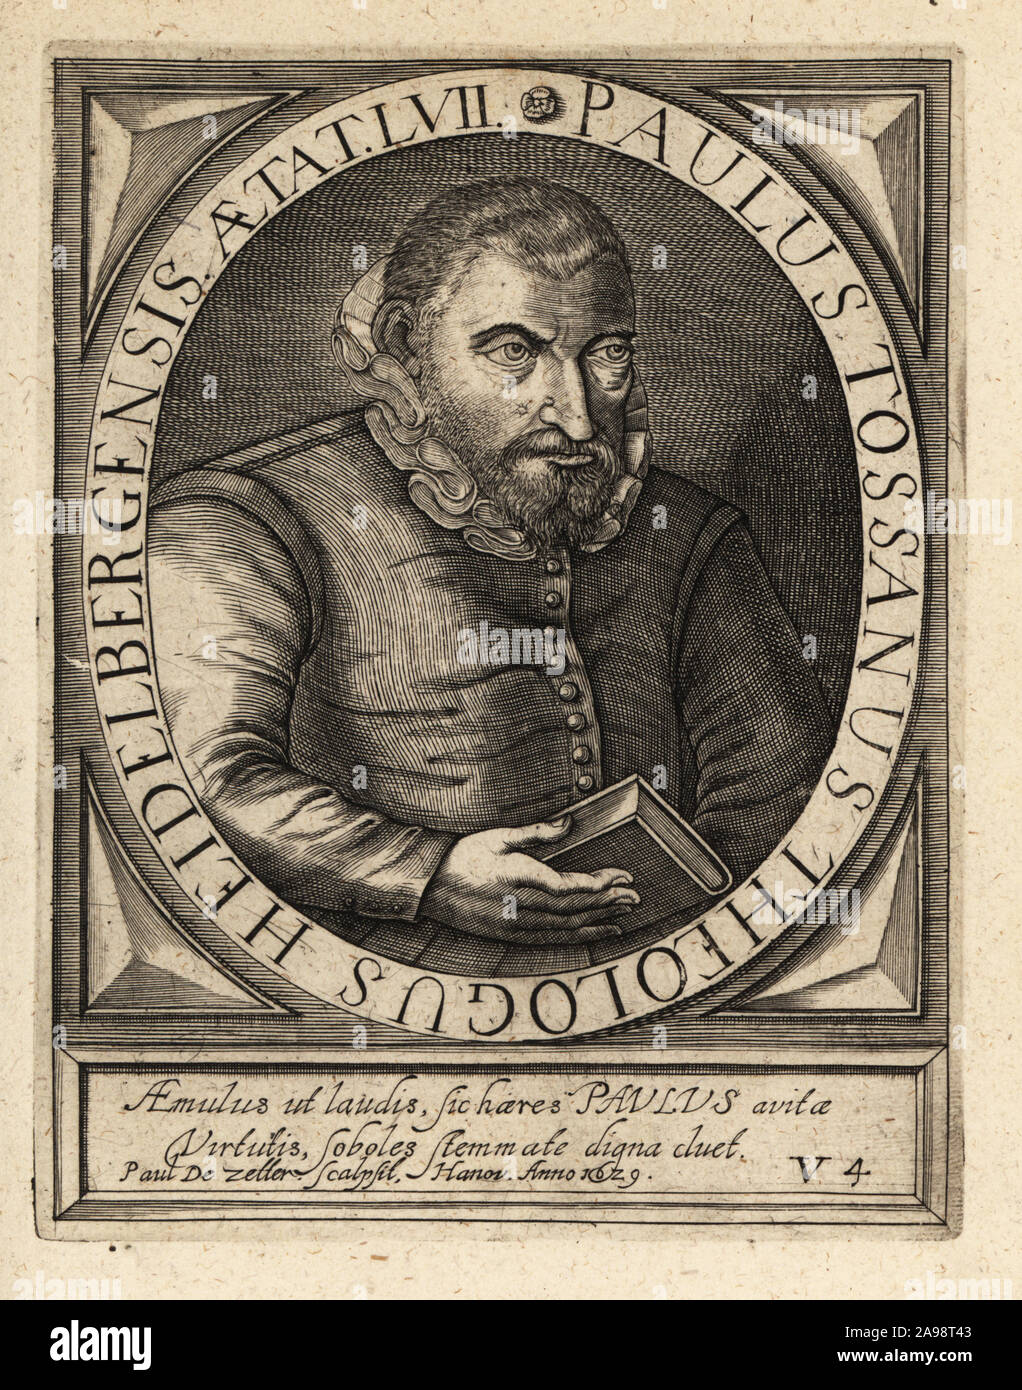 Paul Toussain, 1572-1634, Huguenot minister and theologian of Heidelberg, at age 57. Paulus Tossanus Theologus Heidelbergensis Aetat LVII. Copperplate engraving by Johann Theodore de Bry from Jean-Jacques Boissard’s Bibliotheca Chalcographica, Johann Ammonius, Frankfurt, 1650. Stock Photo